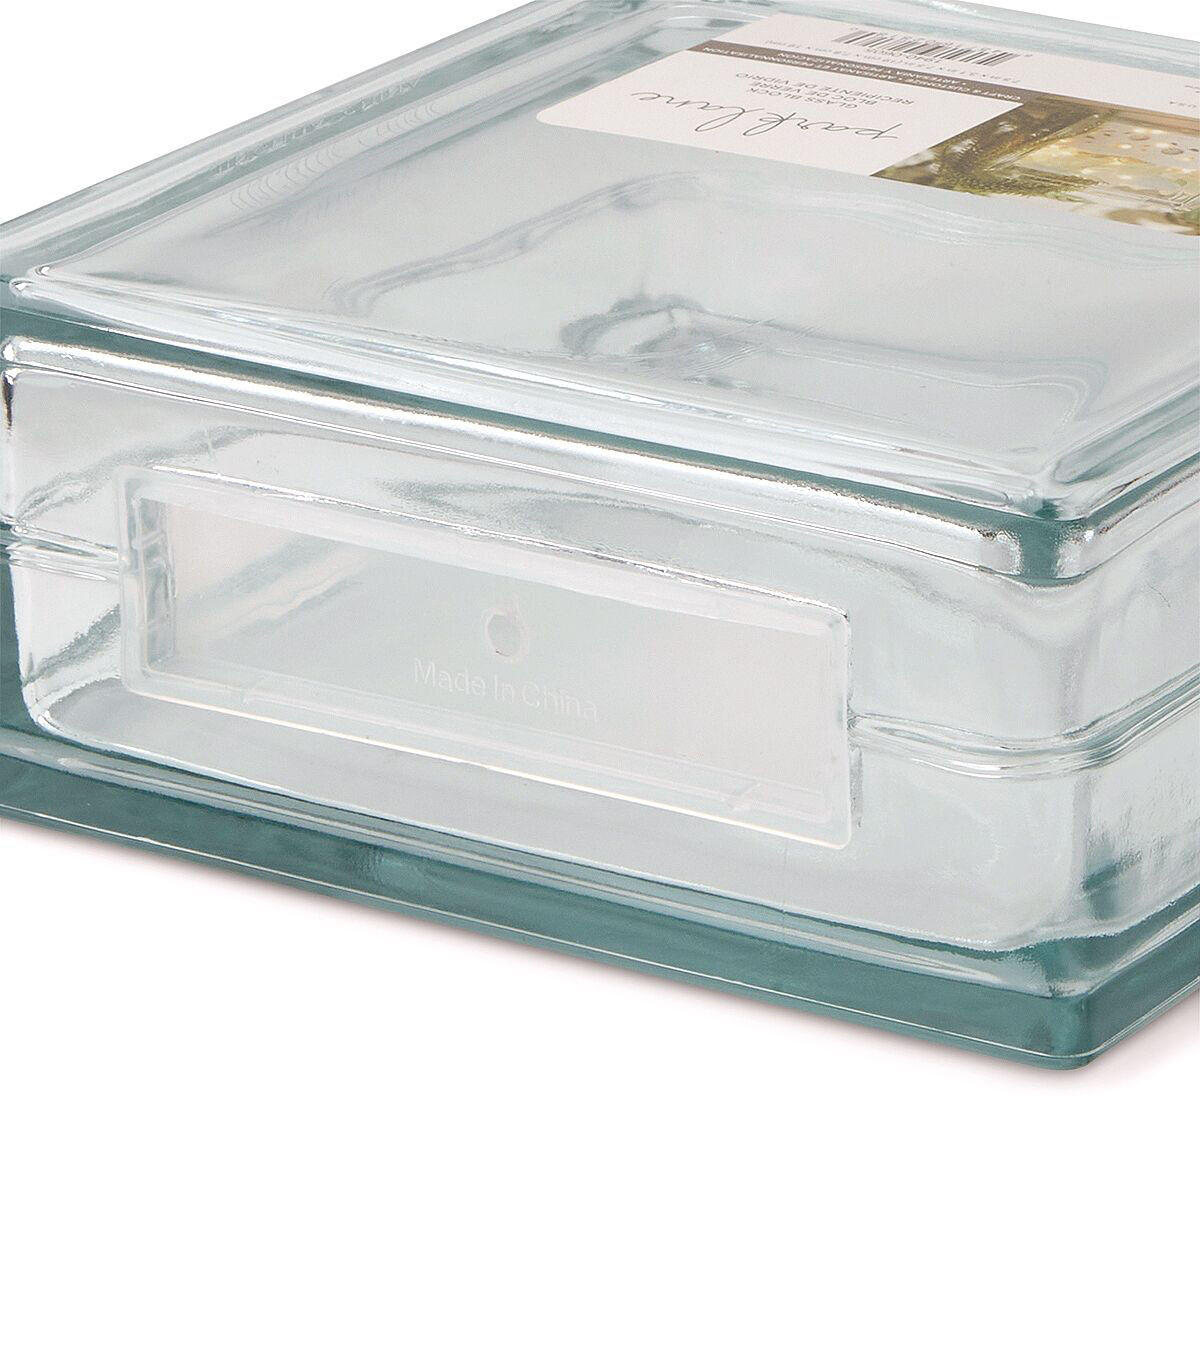 Park Lane 7.5in x 7.5in Glass Block - Transparent - Craft Containers - Crafts & Hobbies